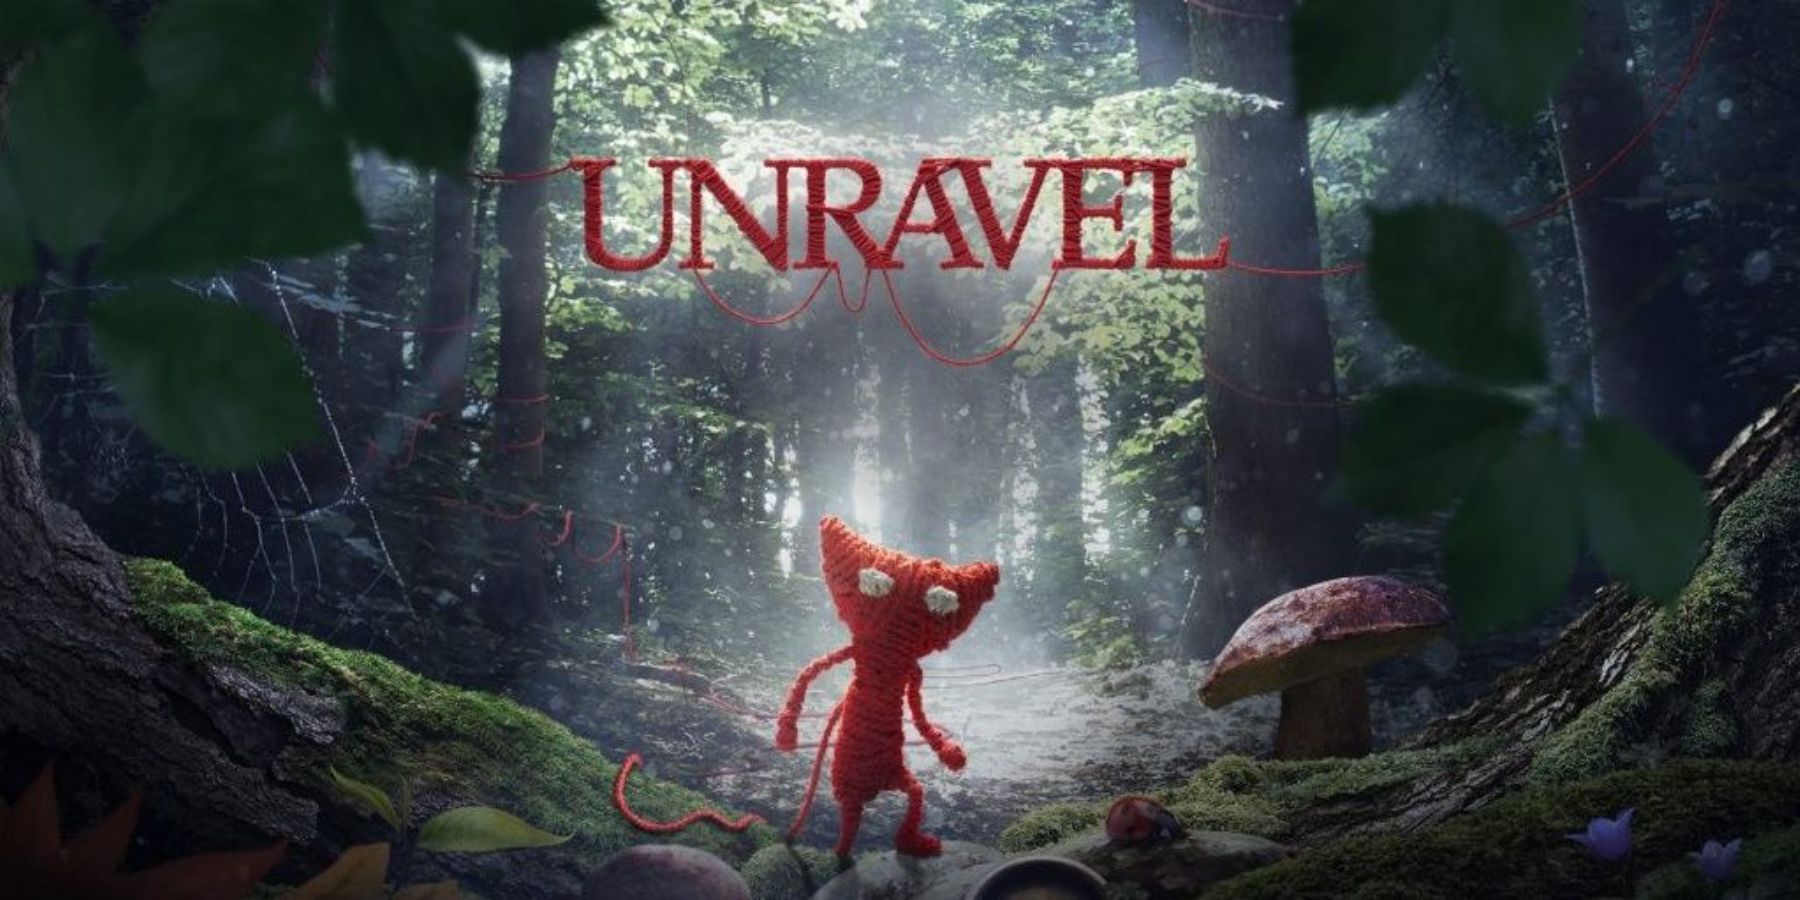 Yarny in a forest